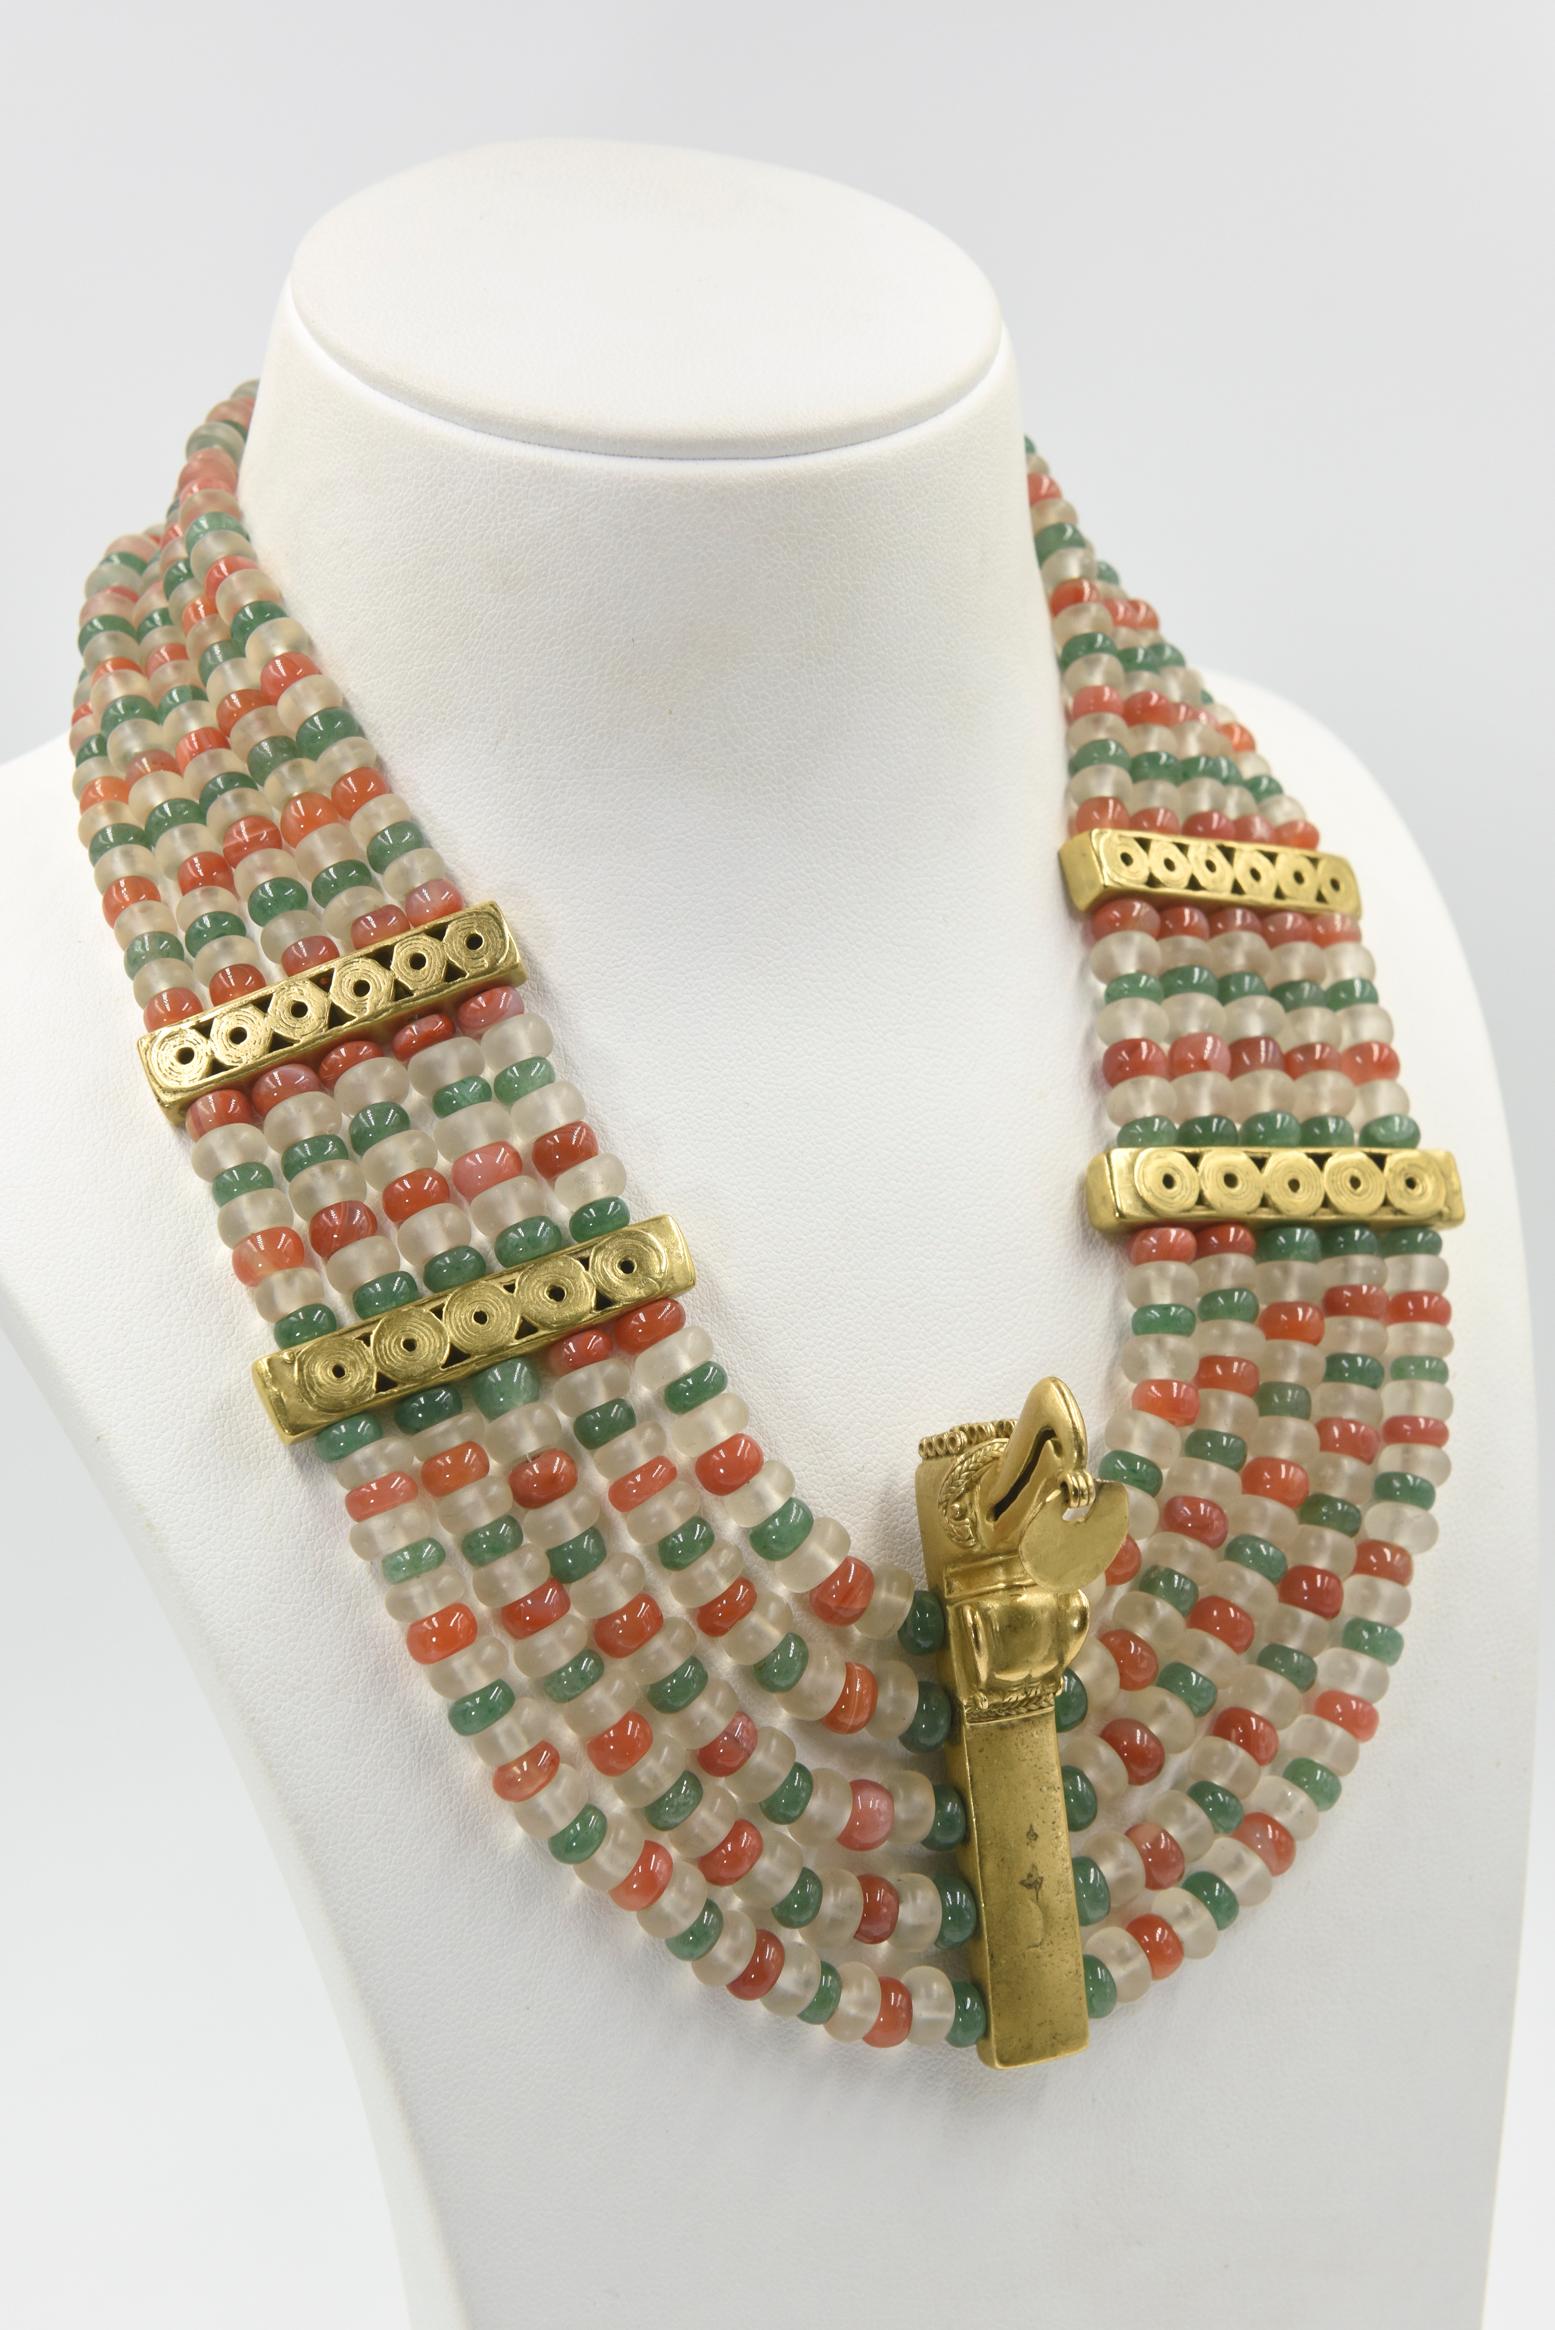 This incredible Pre-Columbian Style jewelry suite comes from the estate of a Miami Socialite.  She was famous for her dramatic gala outfits.  This set is gilt base metal with aventurine quartz, rock crystal, and agate beads accented with gilt